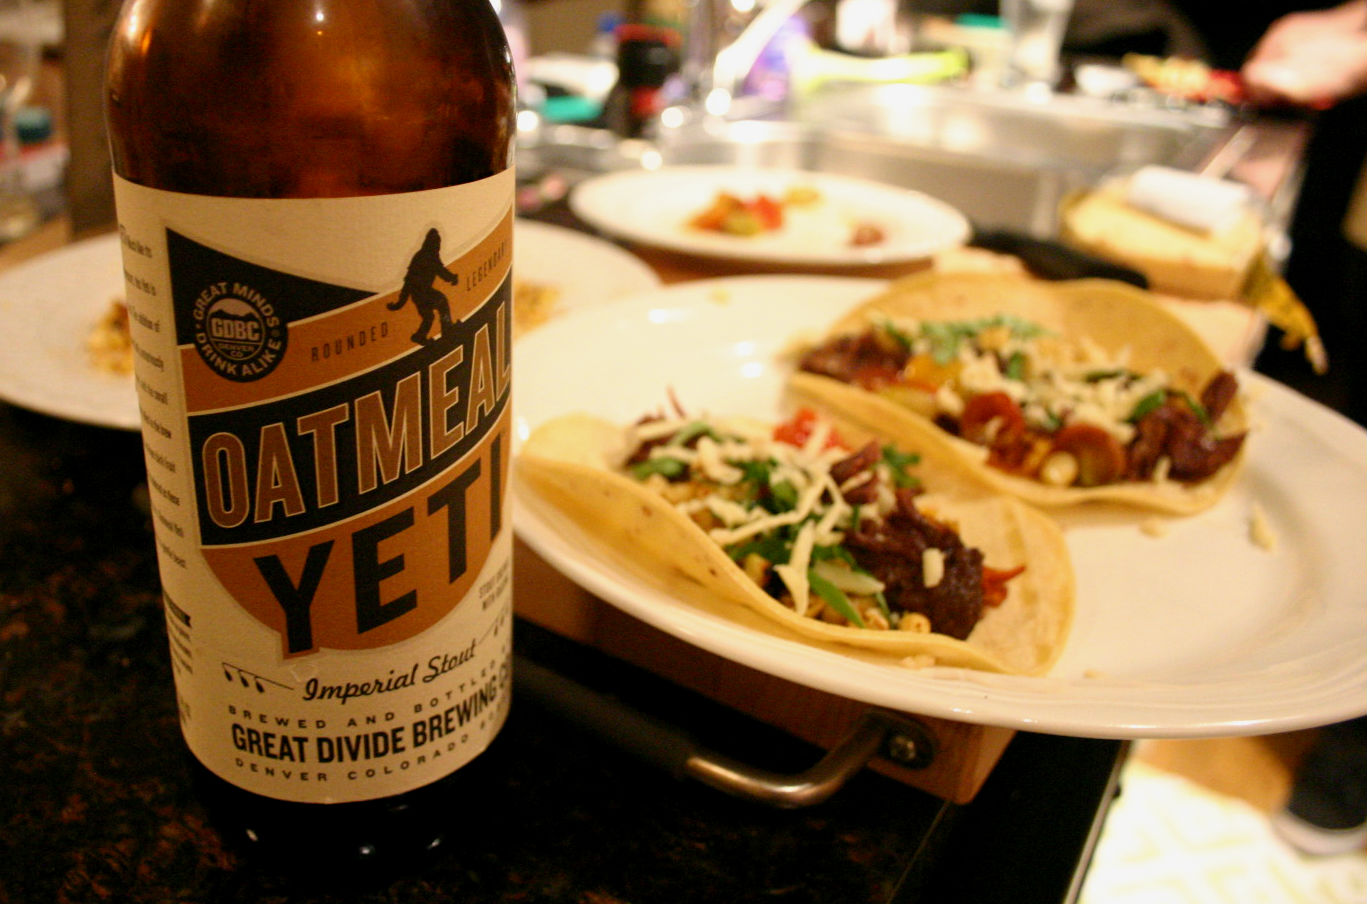 Cooking with Beer | Oatmeal Yeti Braised Short Rib Tacos